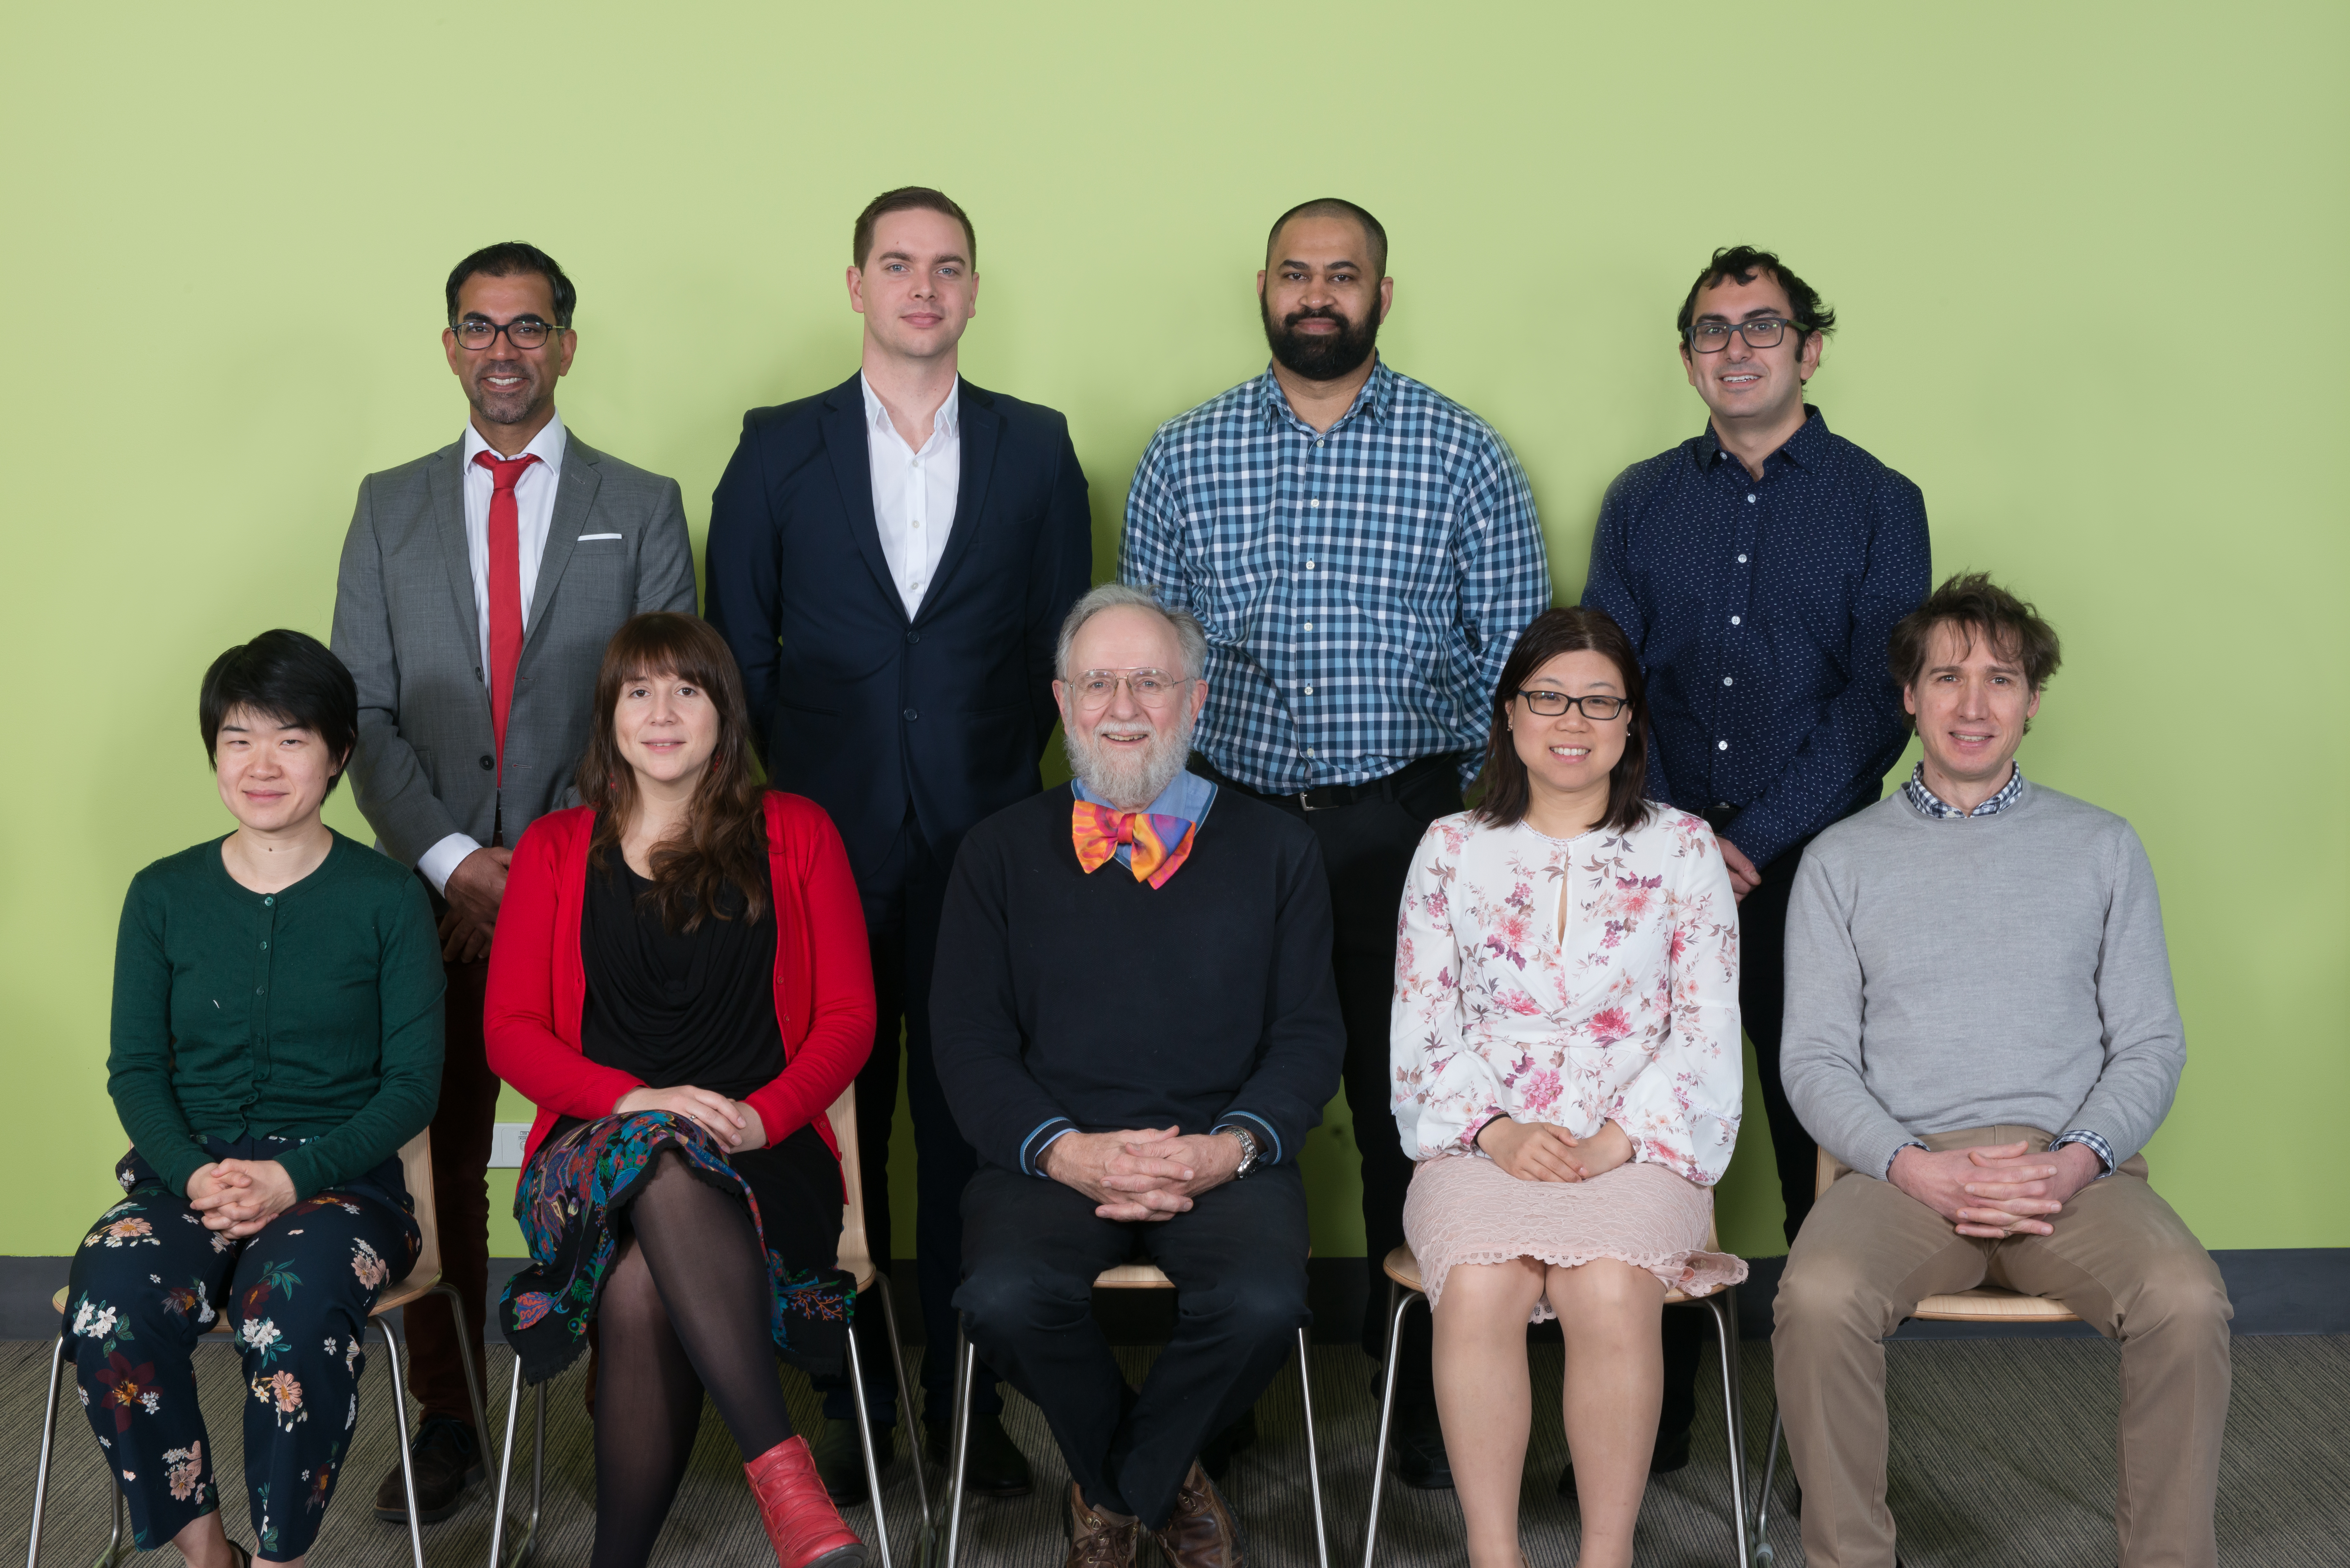 2018 registrars and fellows